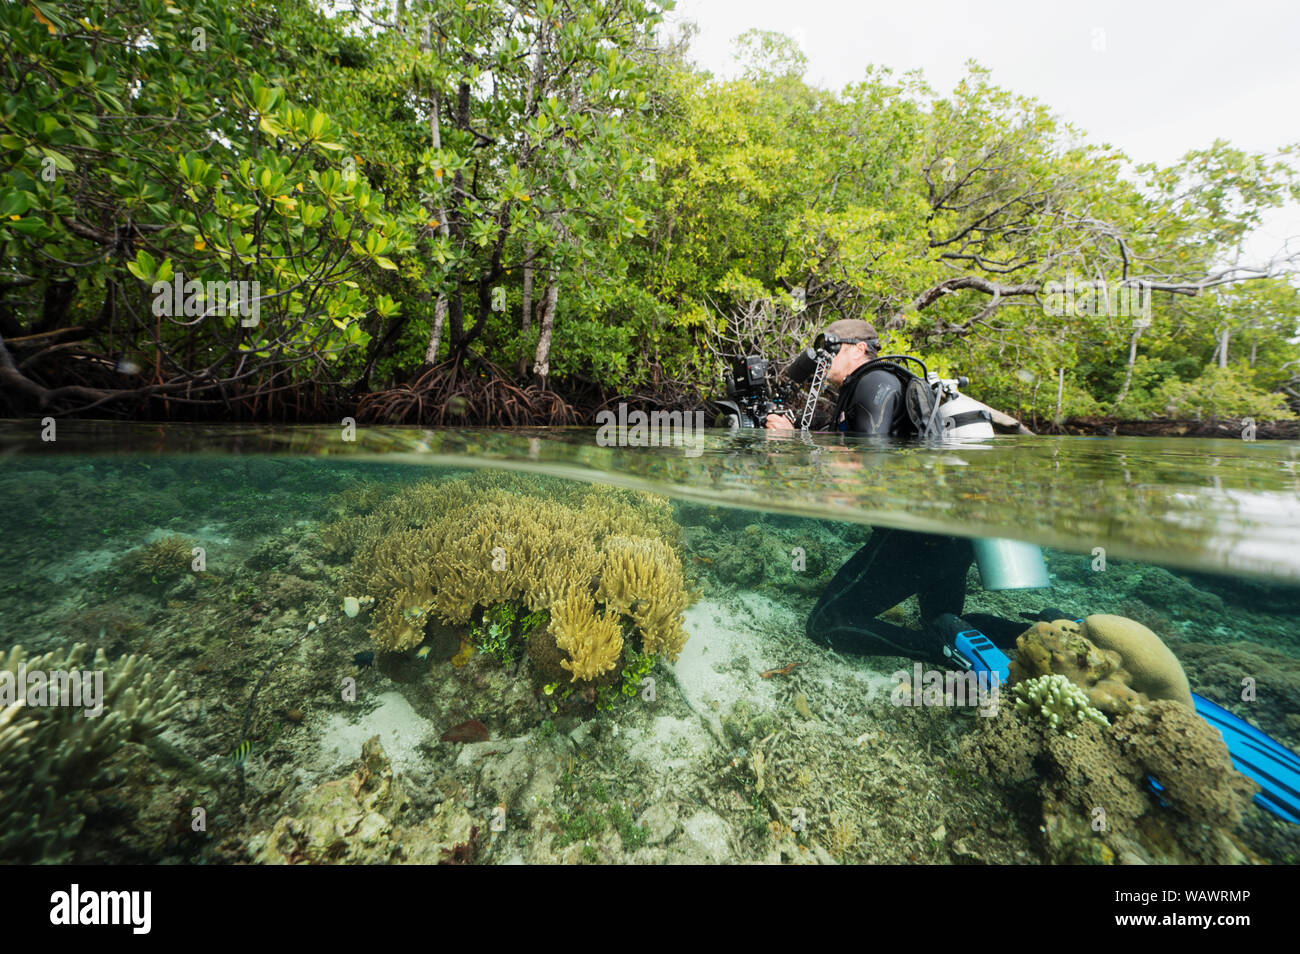 Wildlife photographer Tim Laman filming over-under mangroves and coral reef in Raja Ampat Indonesia. Stock Photo